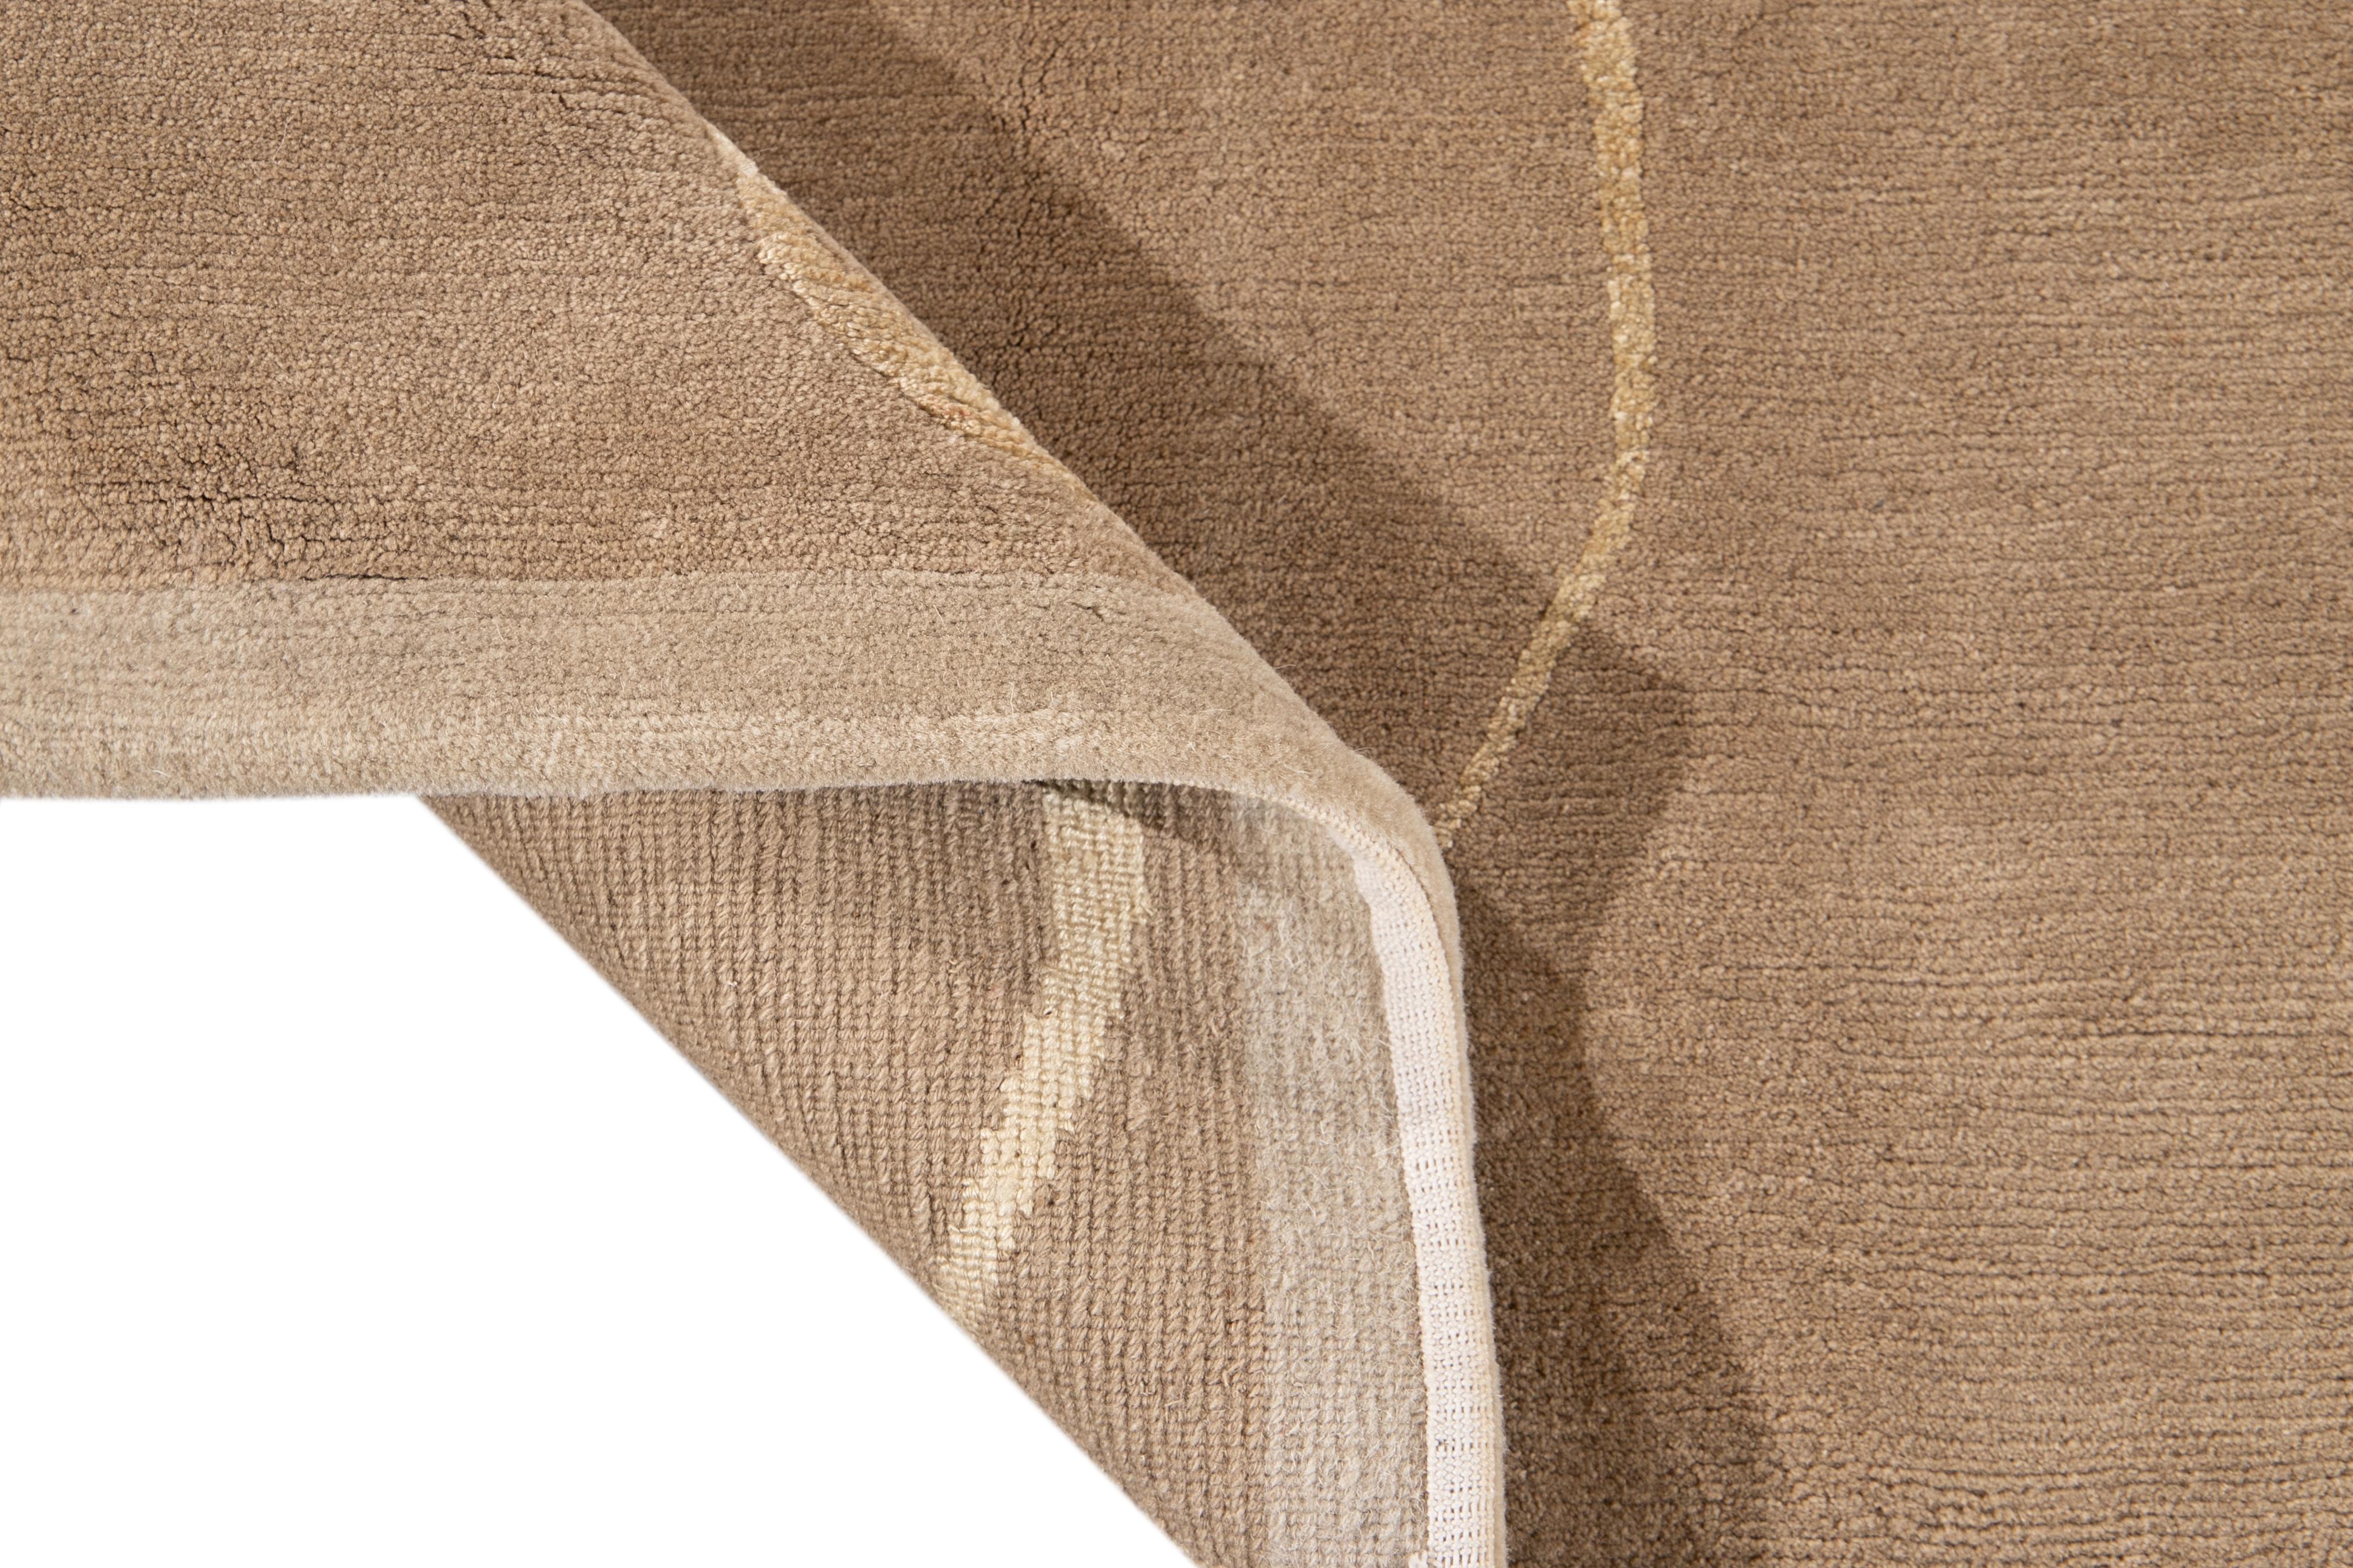 Beautiful modern Tibetan hand knotted wool rug with the tan field. This rug has accents of beige in a gorgeous all-over abstract expressionist design.

This rug measures: 9' x 12'.